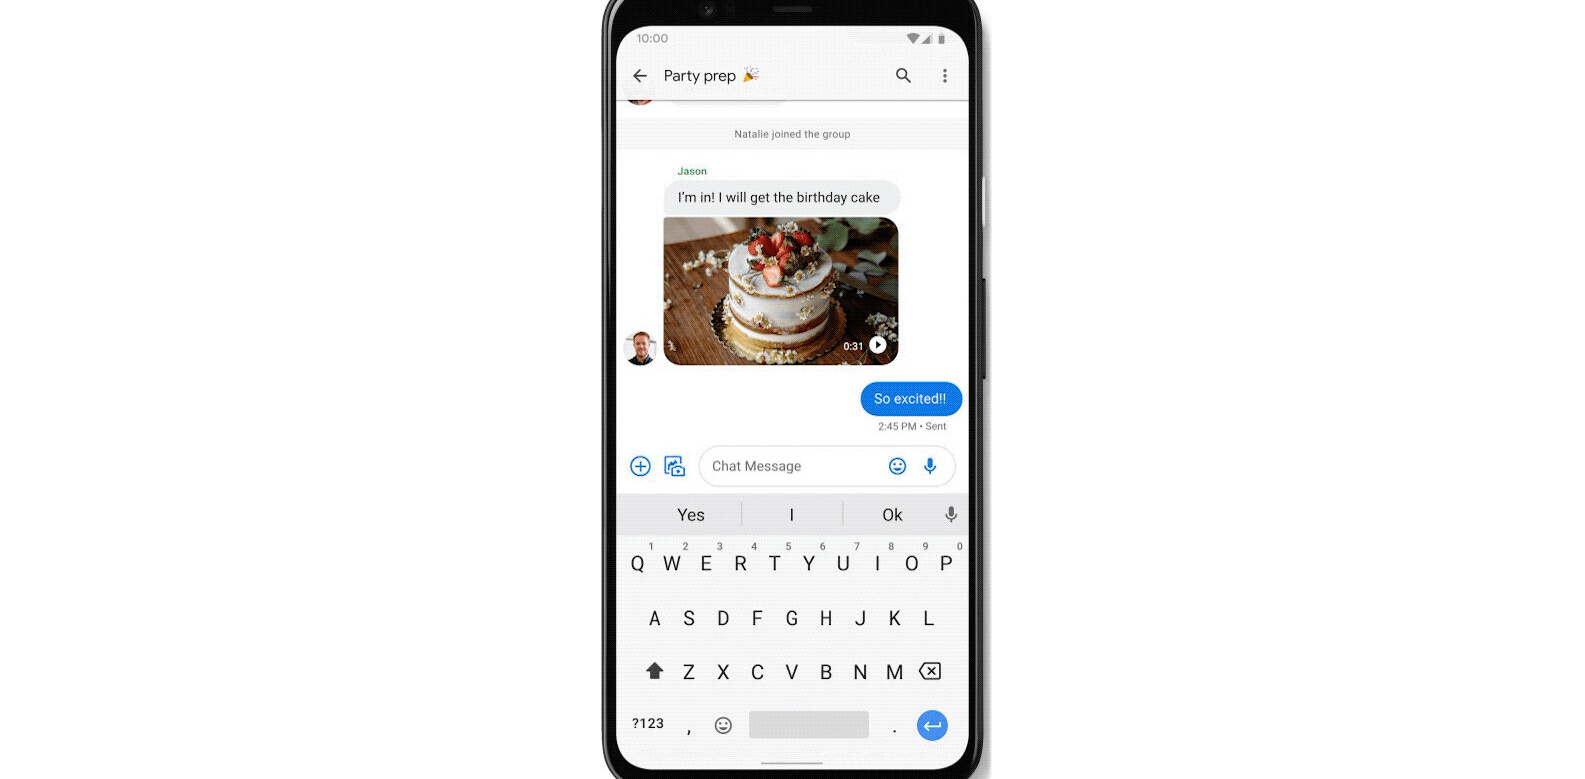 iMessage-style texting is now available on Android across the US – here’s how to get it